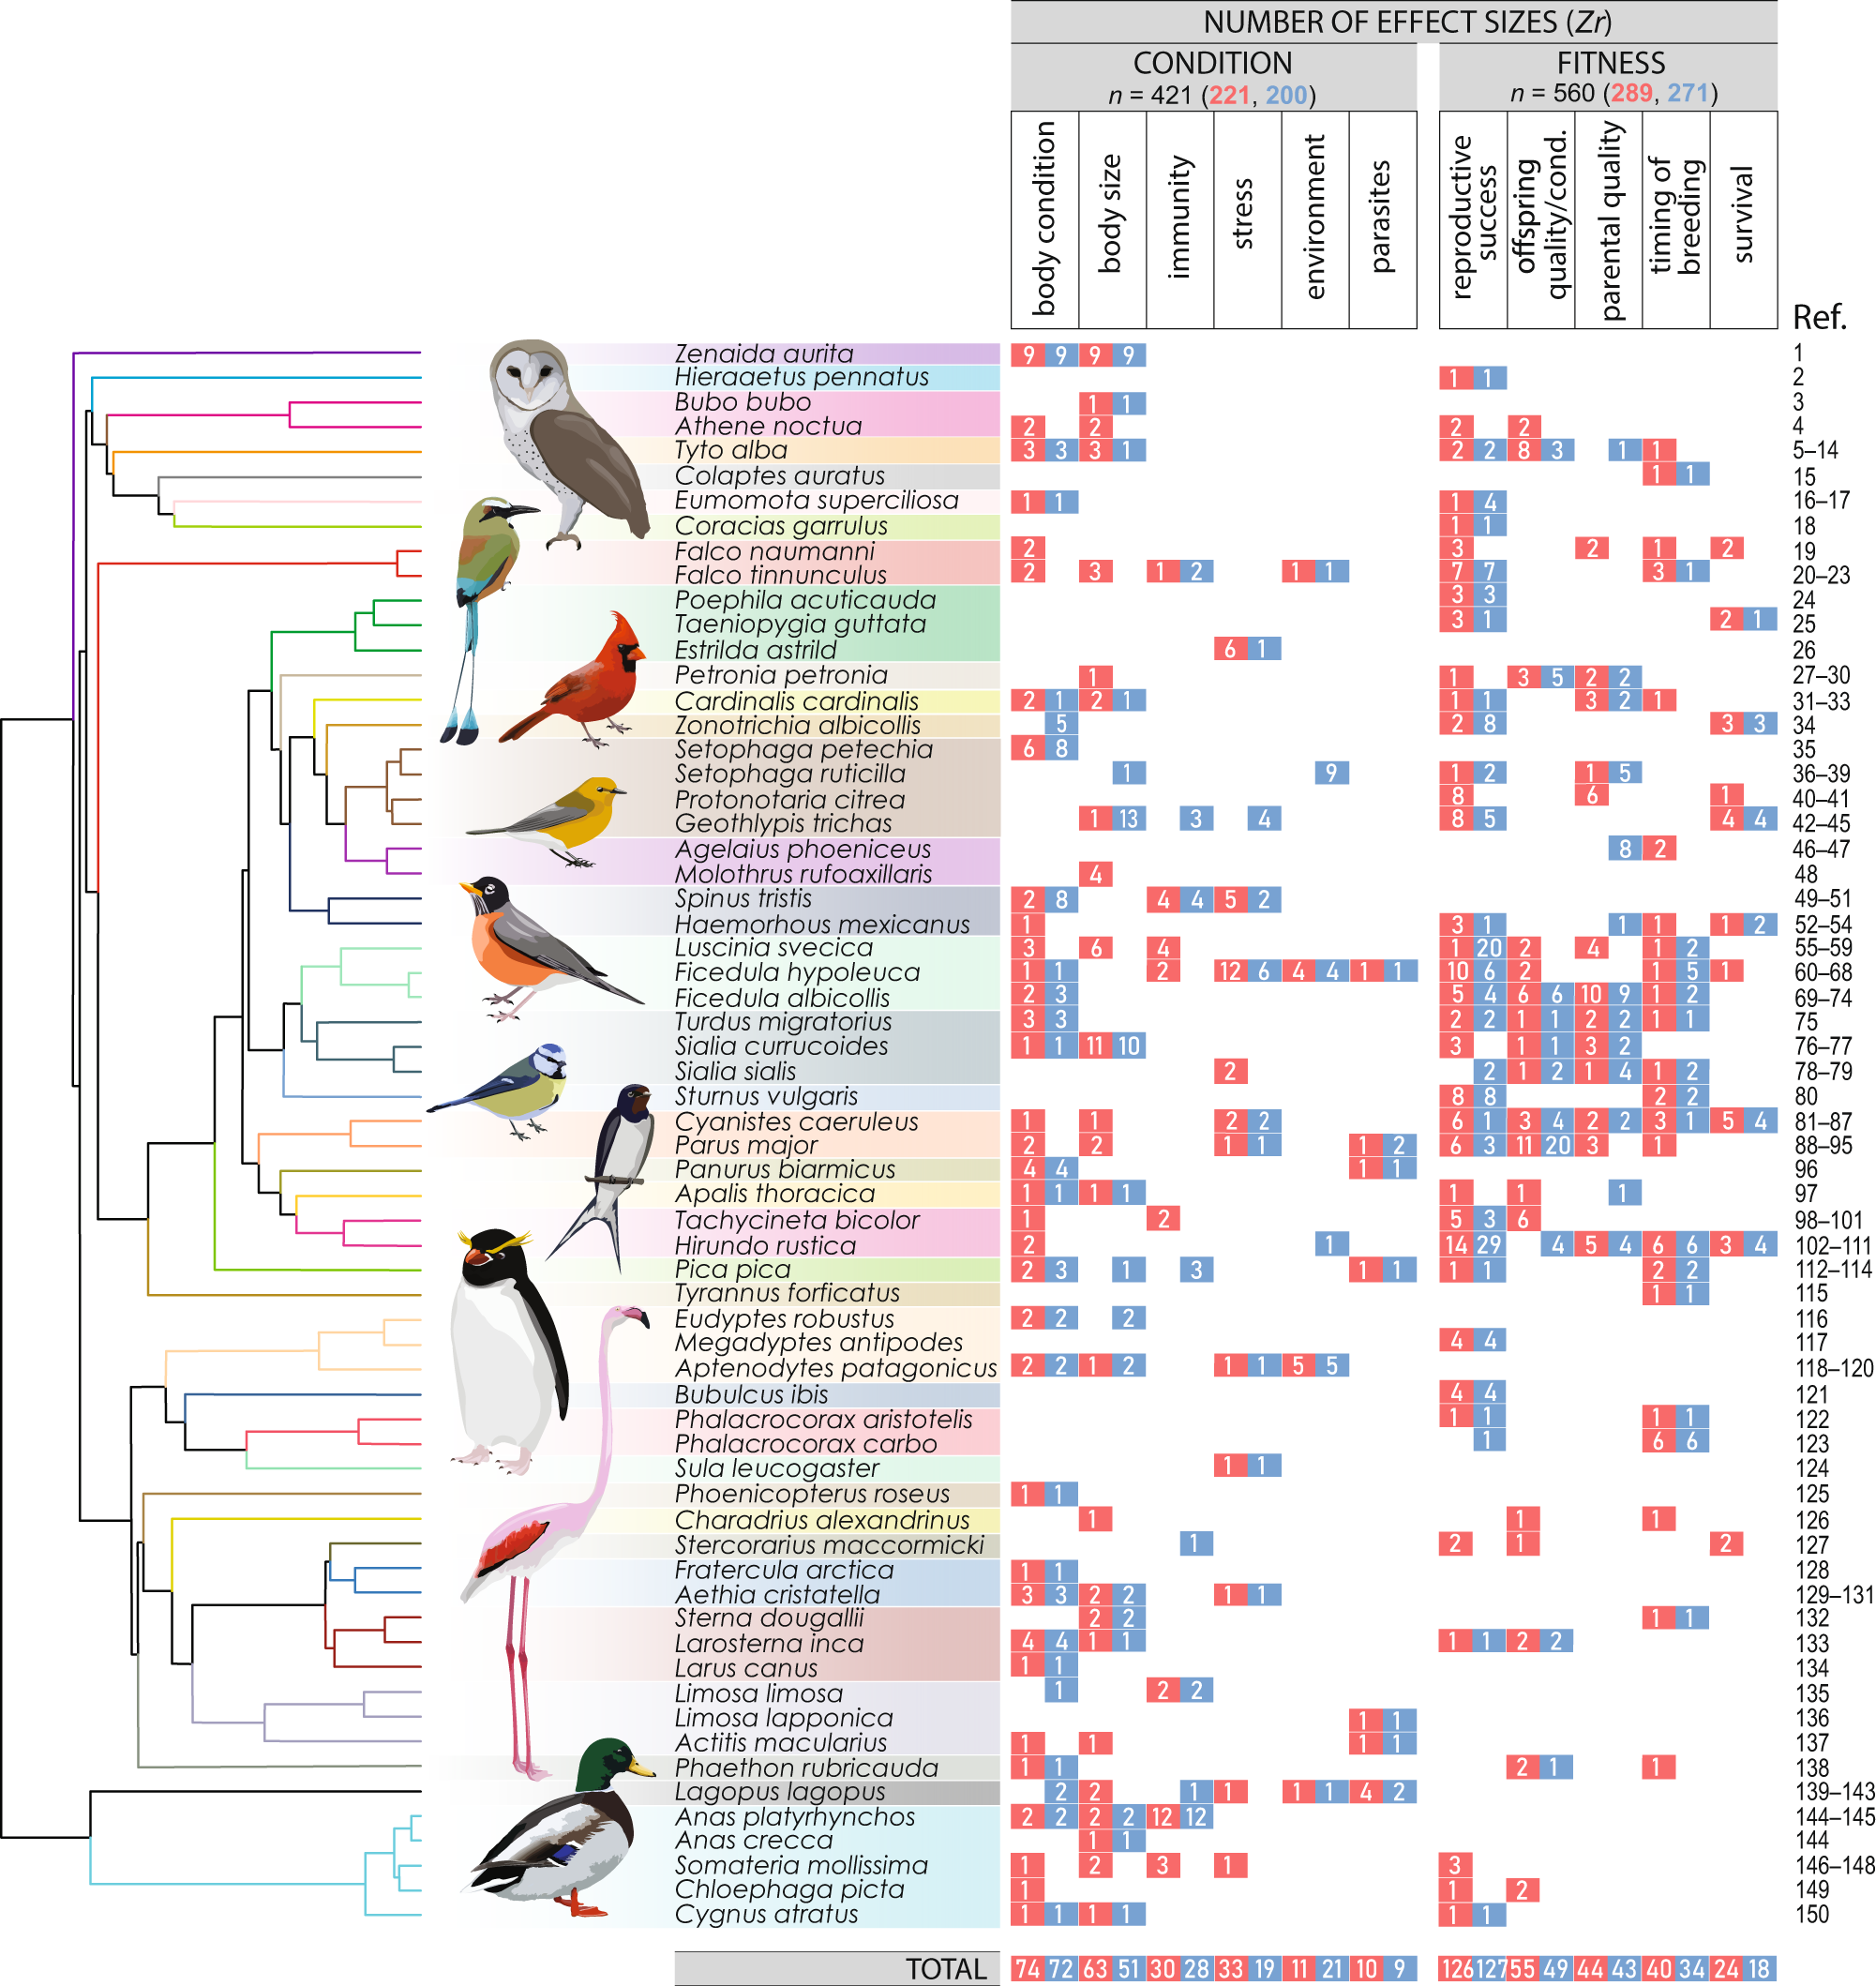 Ornaments are equally informative in male and female birds | Nature  Communications